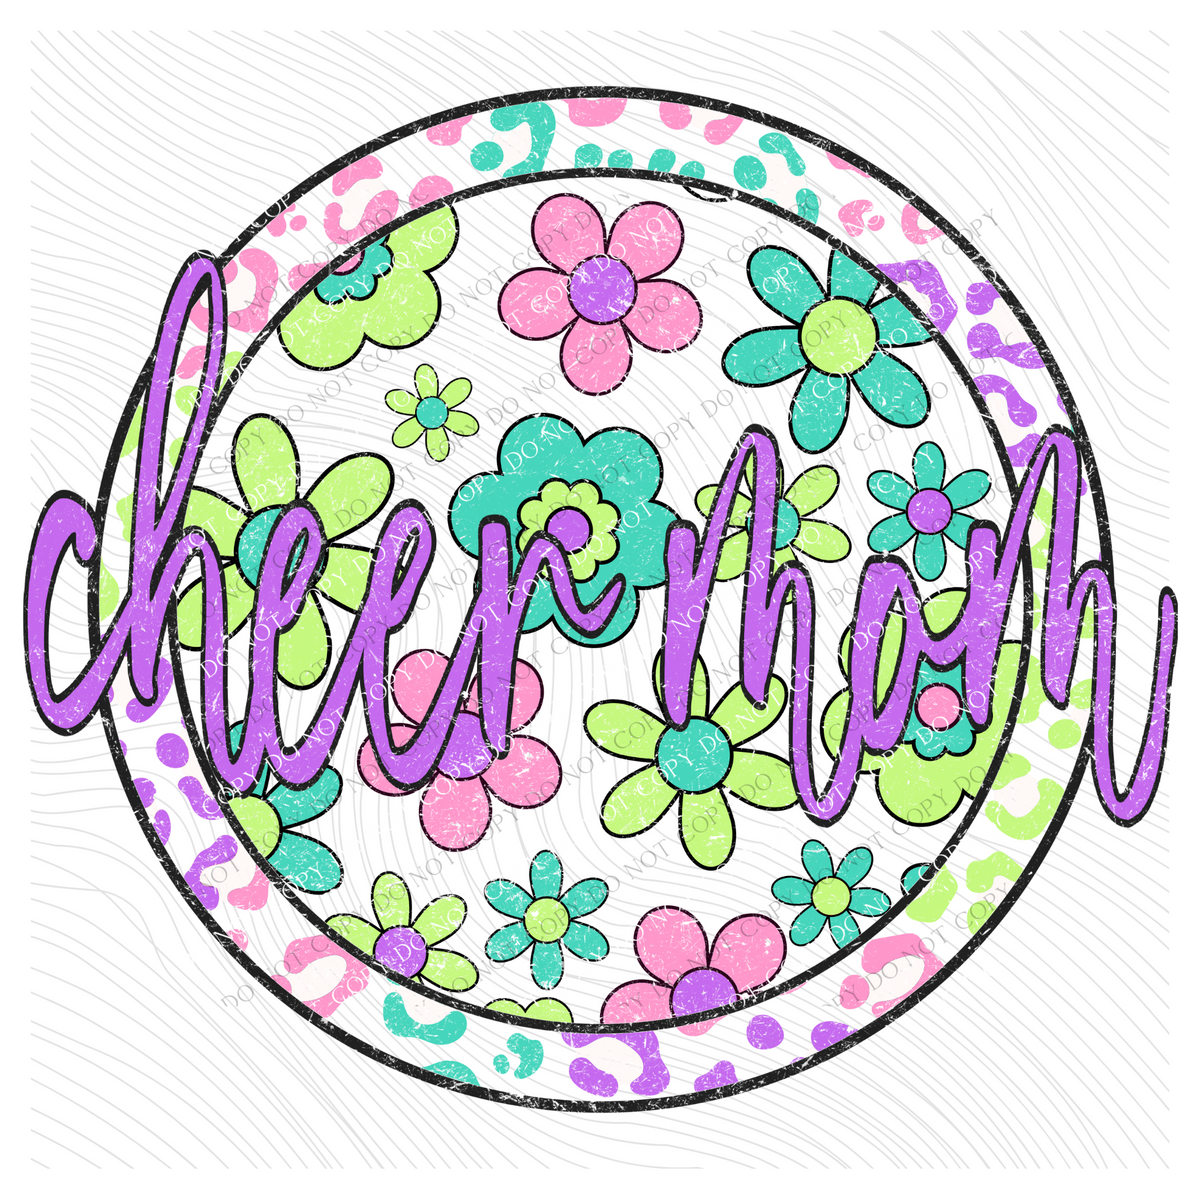 Cheer Mom Groovy Leopard Translucent Cutout in Bright Cotton Candy Tones Digital Design, PNG